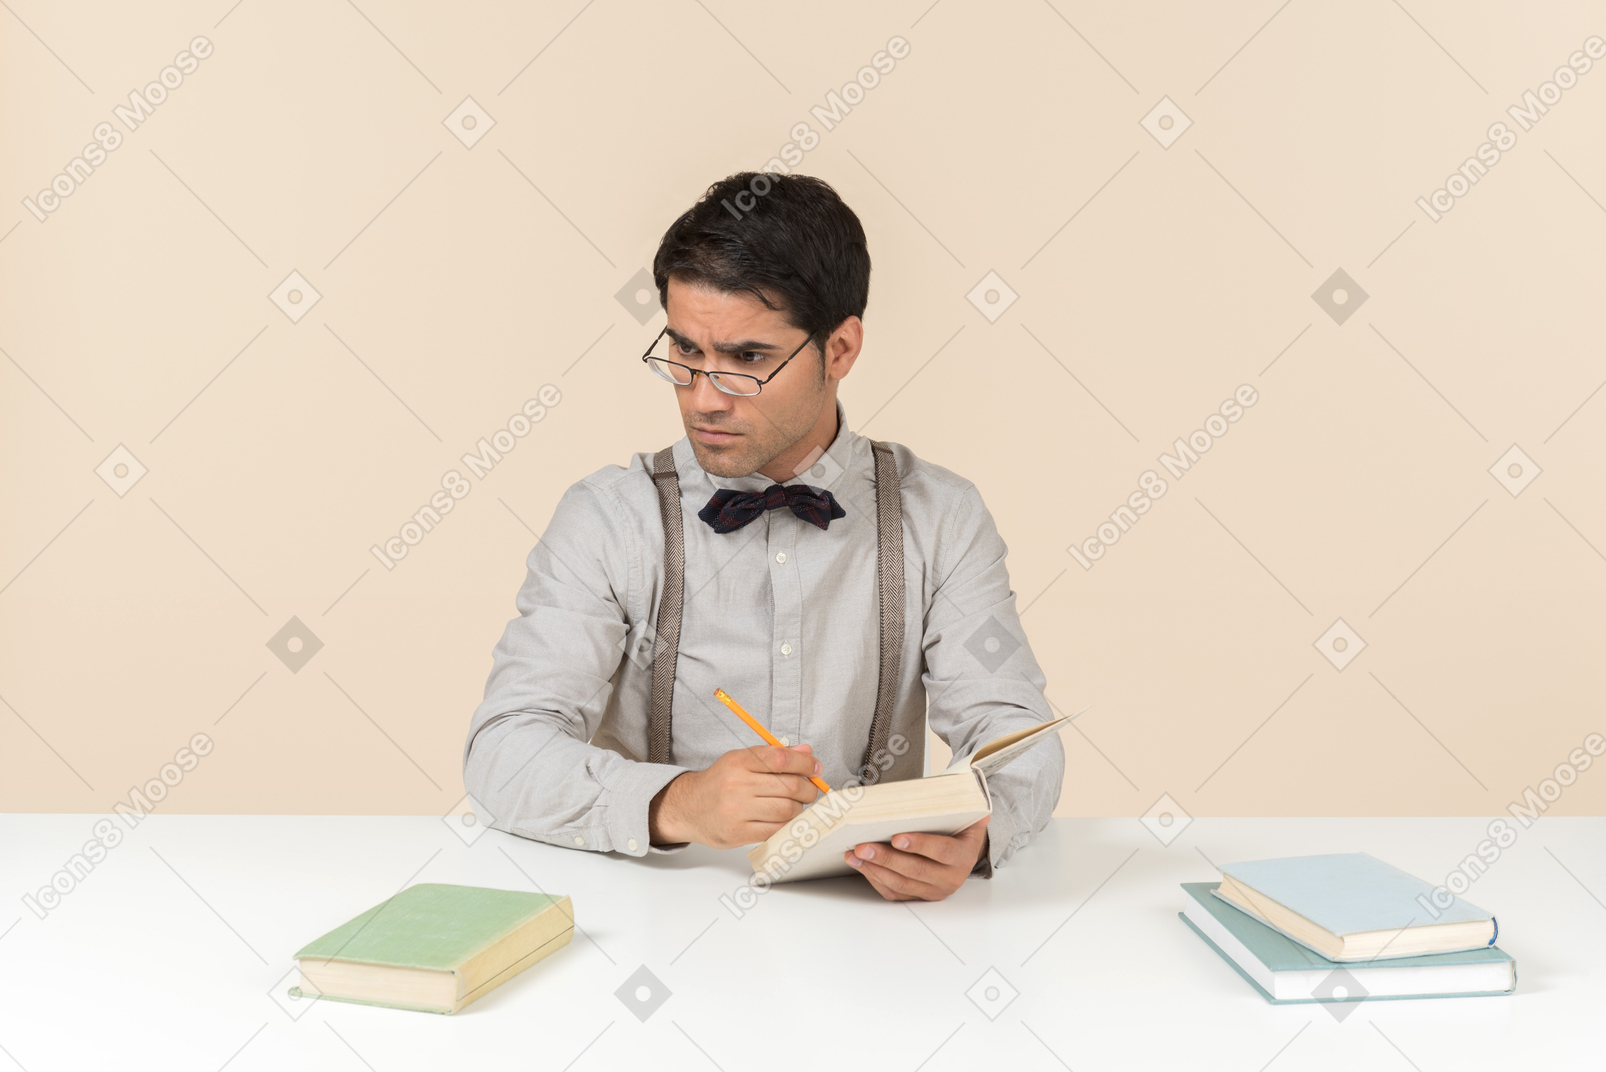 Teacher sitting at his desk with books